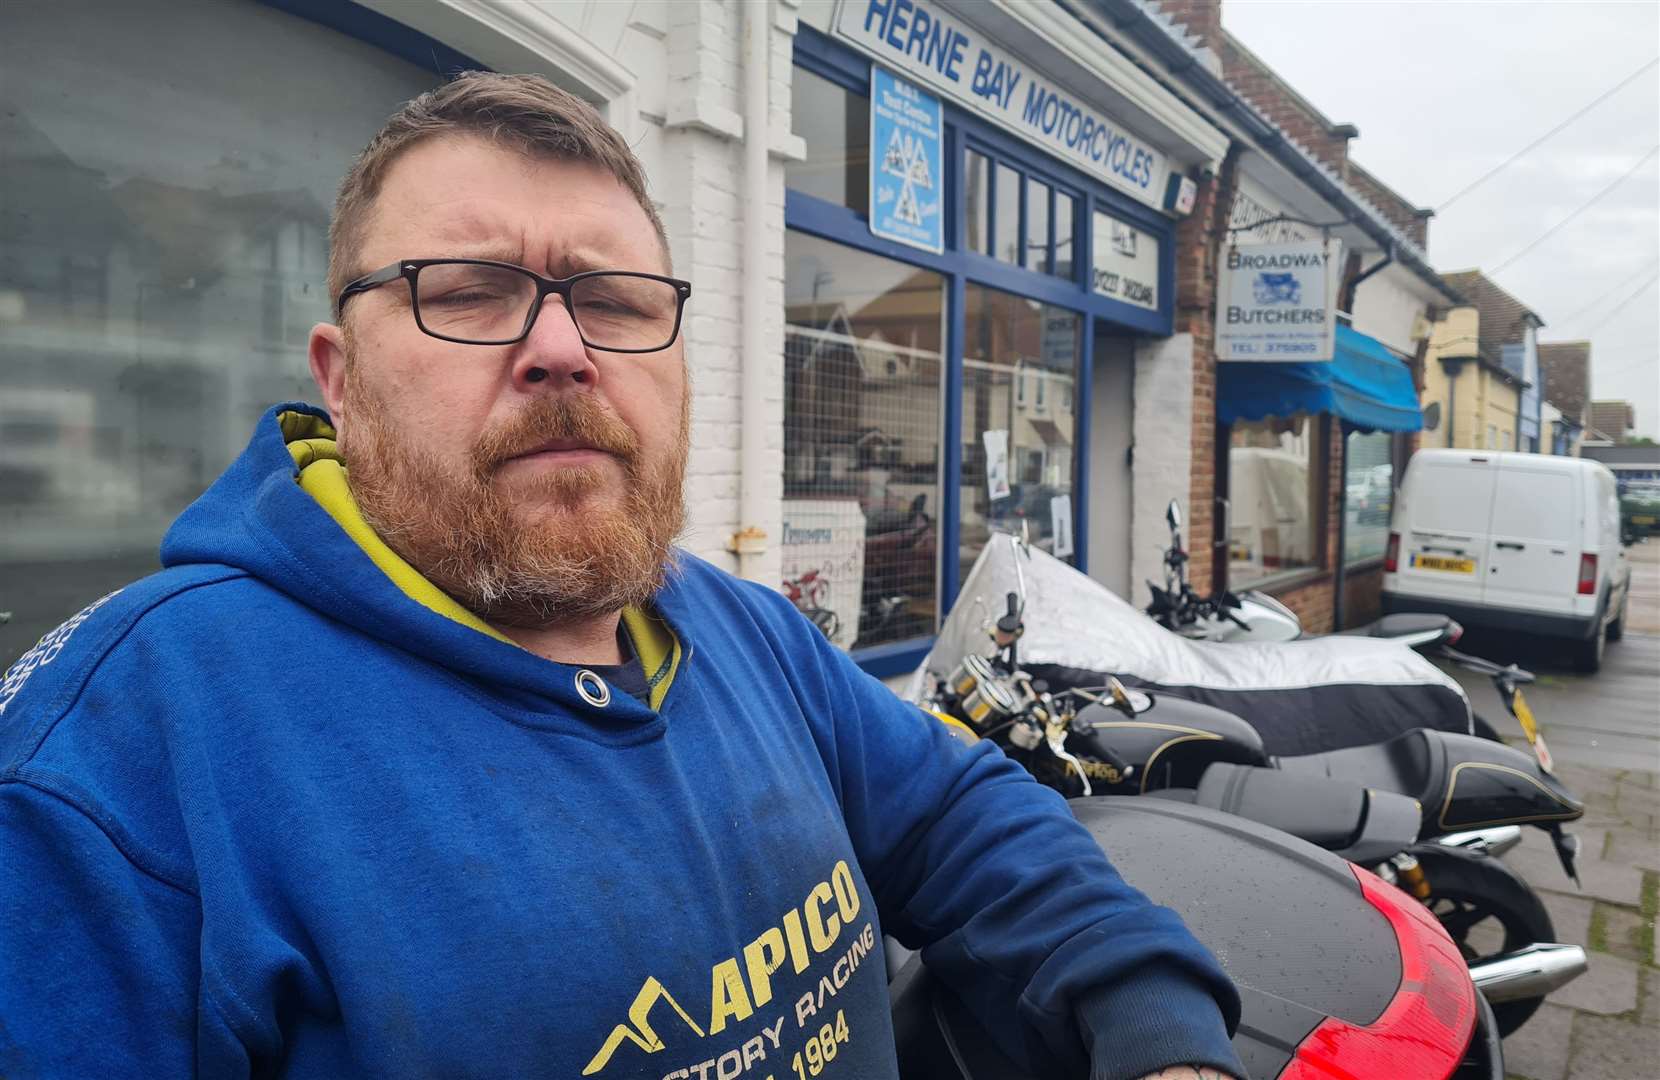 James Wightman, of Herne Bay Motorcycles in The Broadway, is another critic of the 20mph red road markings